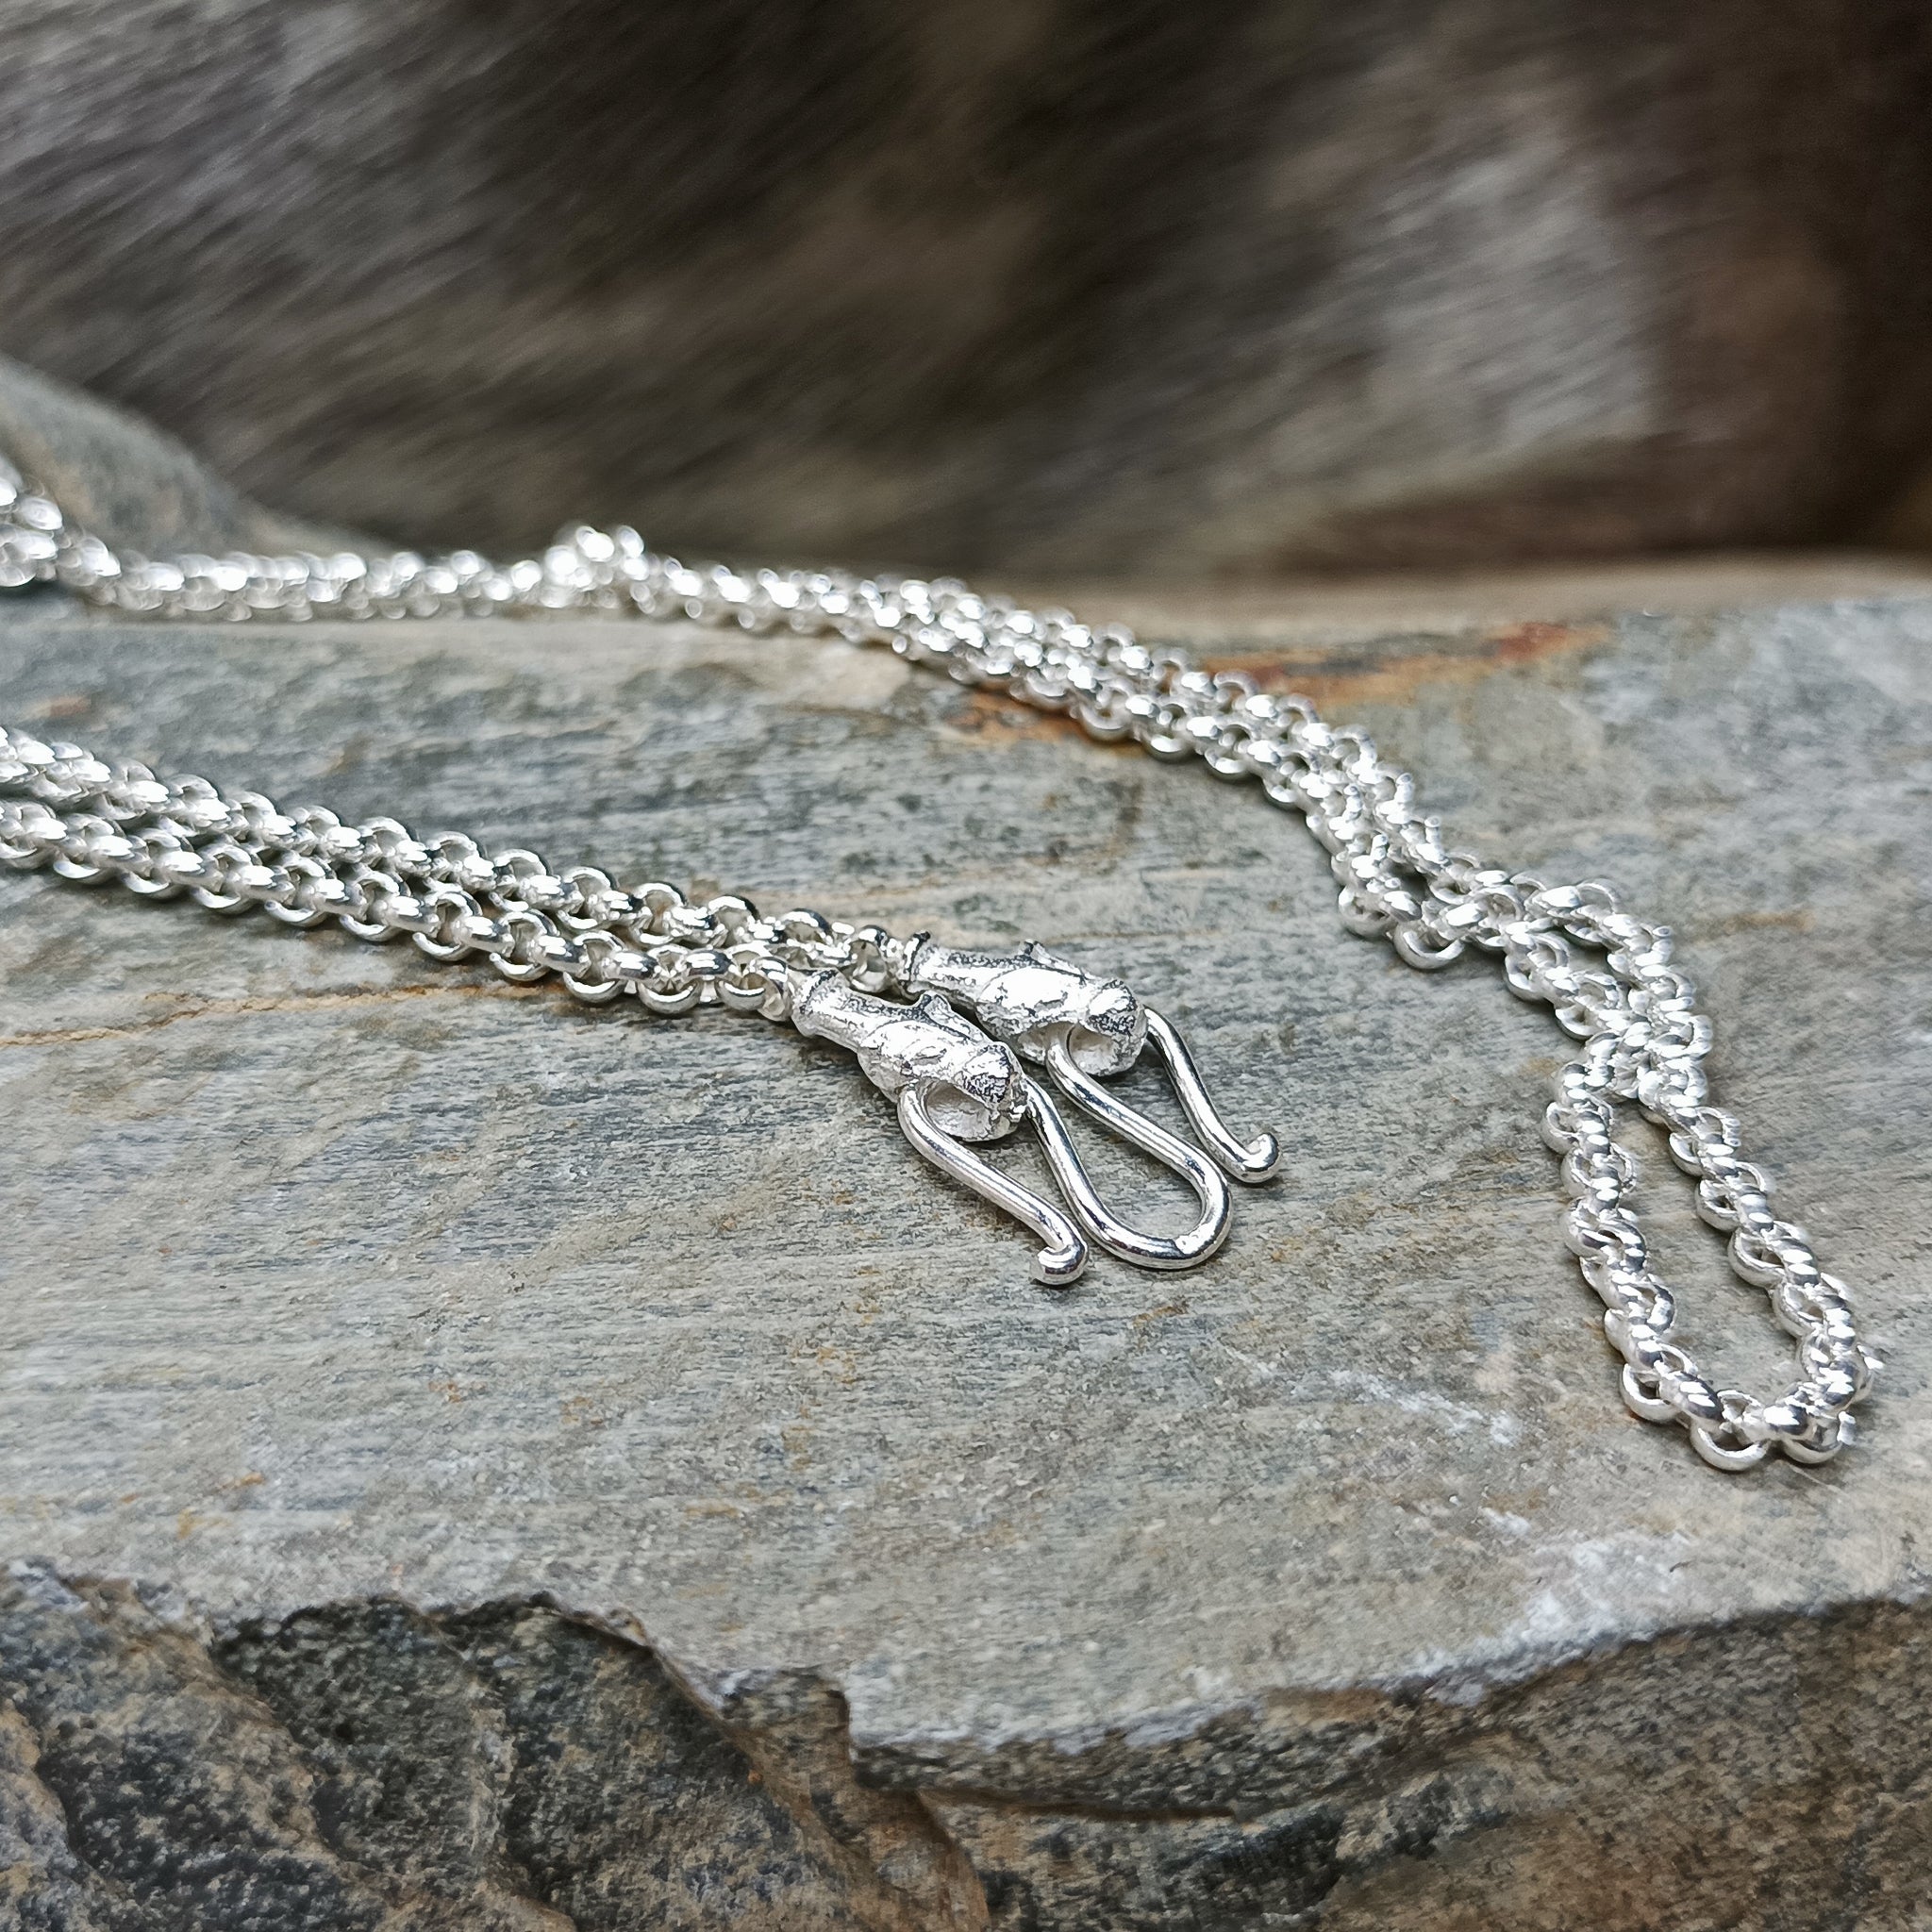 Slim Silver Anchor Chain Pendant Necklace with Icelandic Wolf Heads